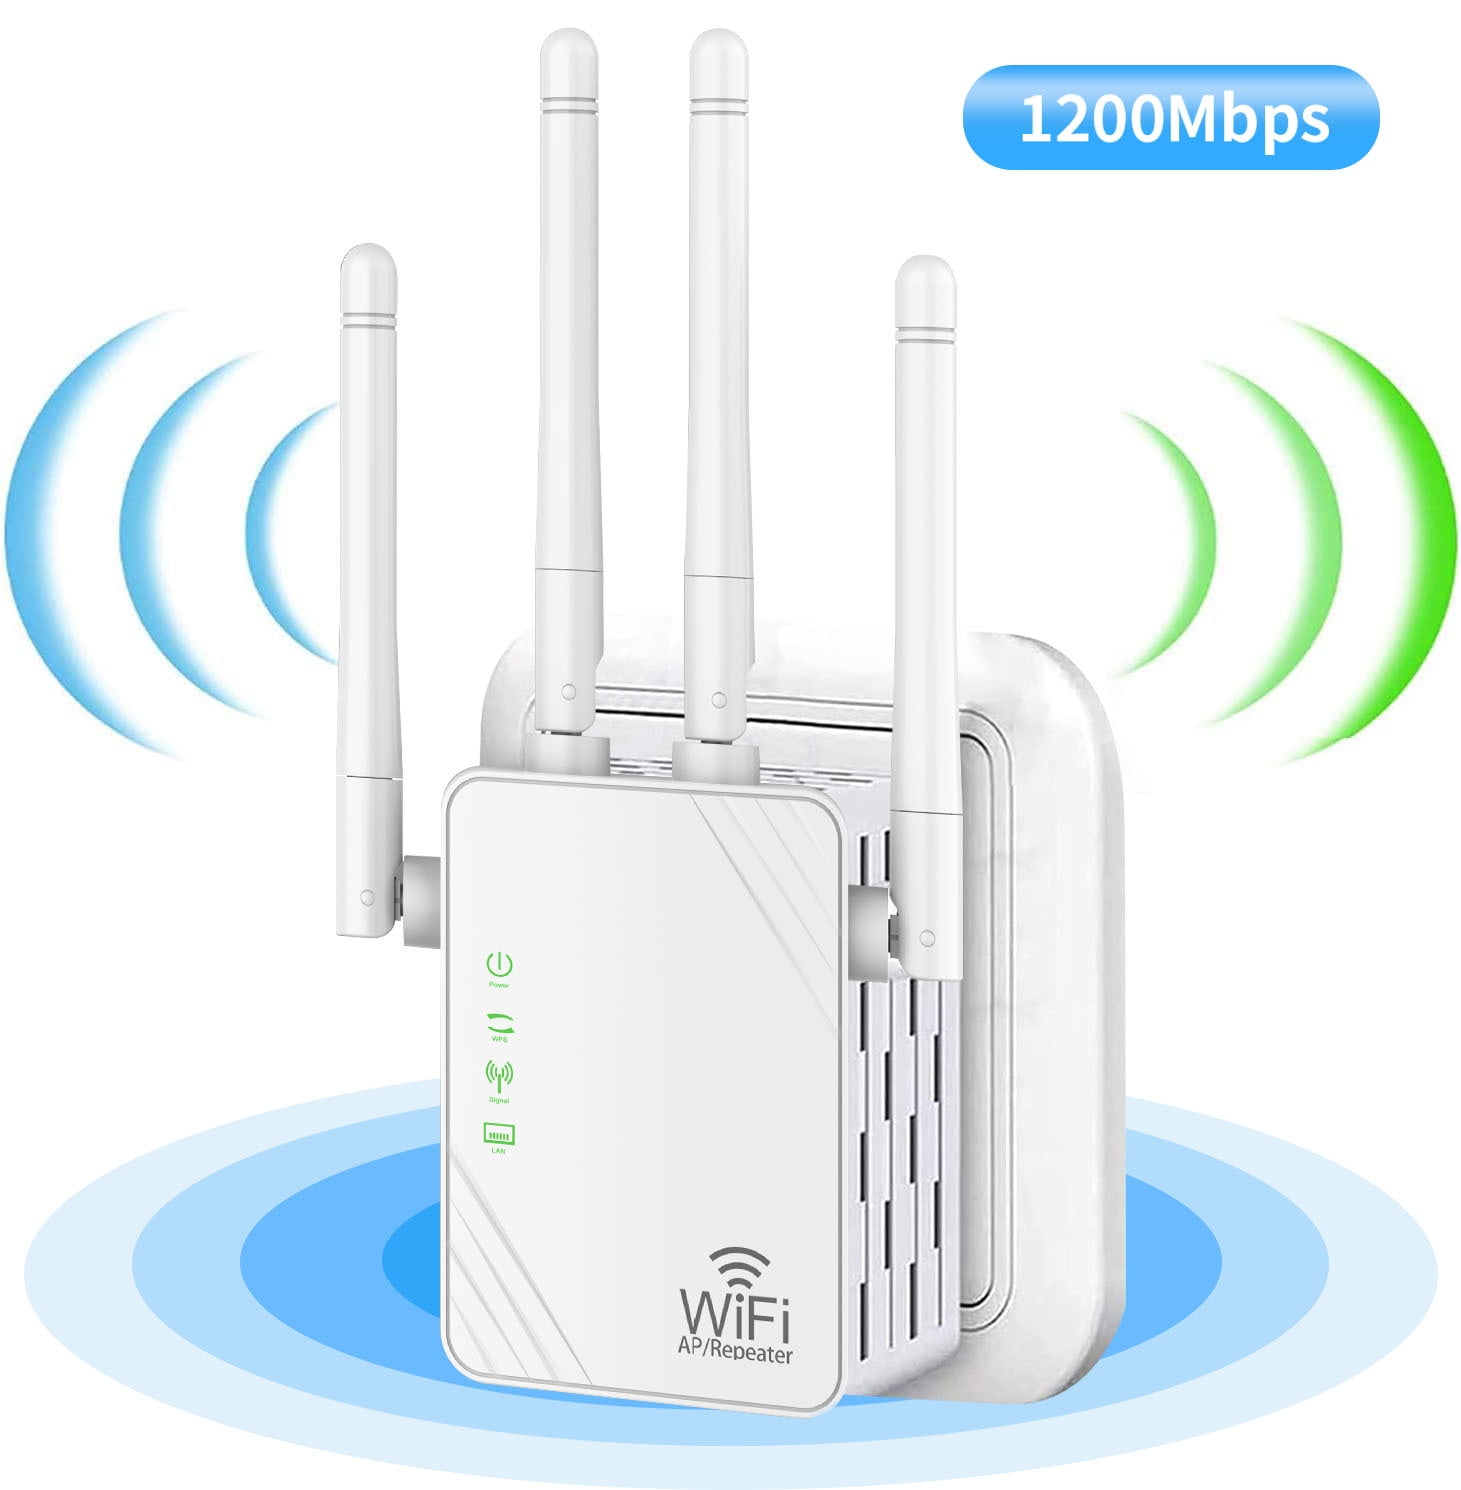 GLEADING WiFi Extender,WiFi Booster Indoor/Outdoor Repeater Signal Booster 1200Mbps WiFi Long Range High Speed 5G/2.4G WiFi Internet Connection (White) - Walmart.com